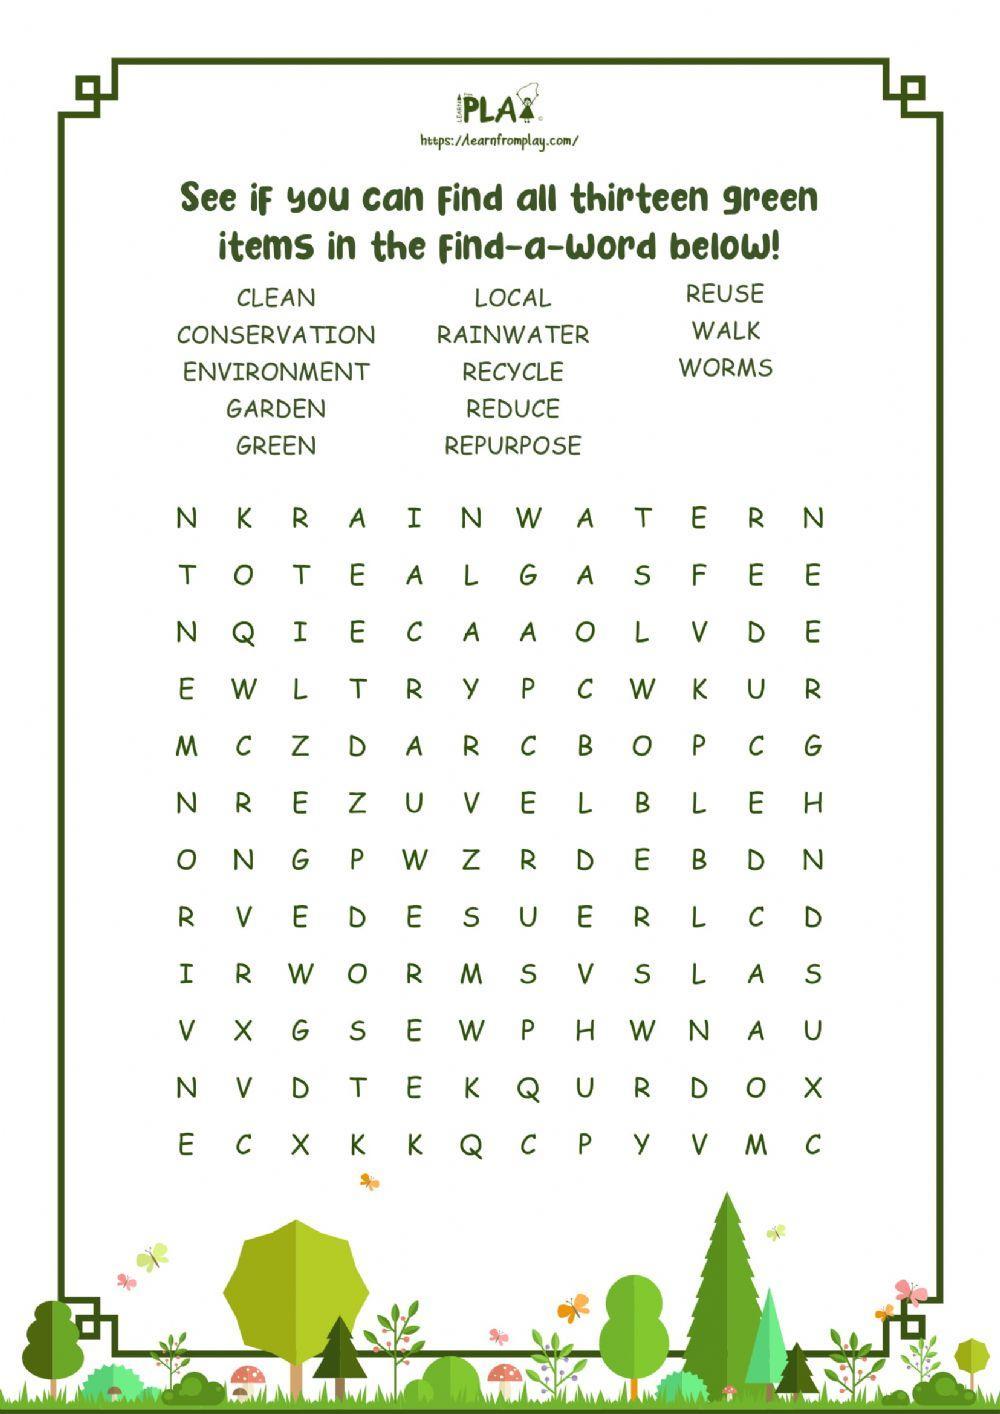 What Does It Mean To Be Green - Find-A-Word